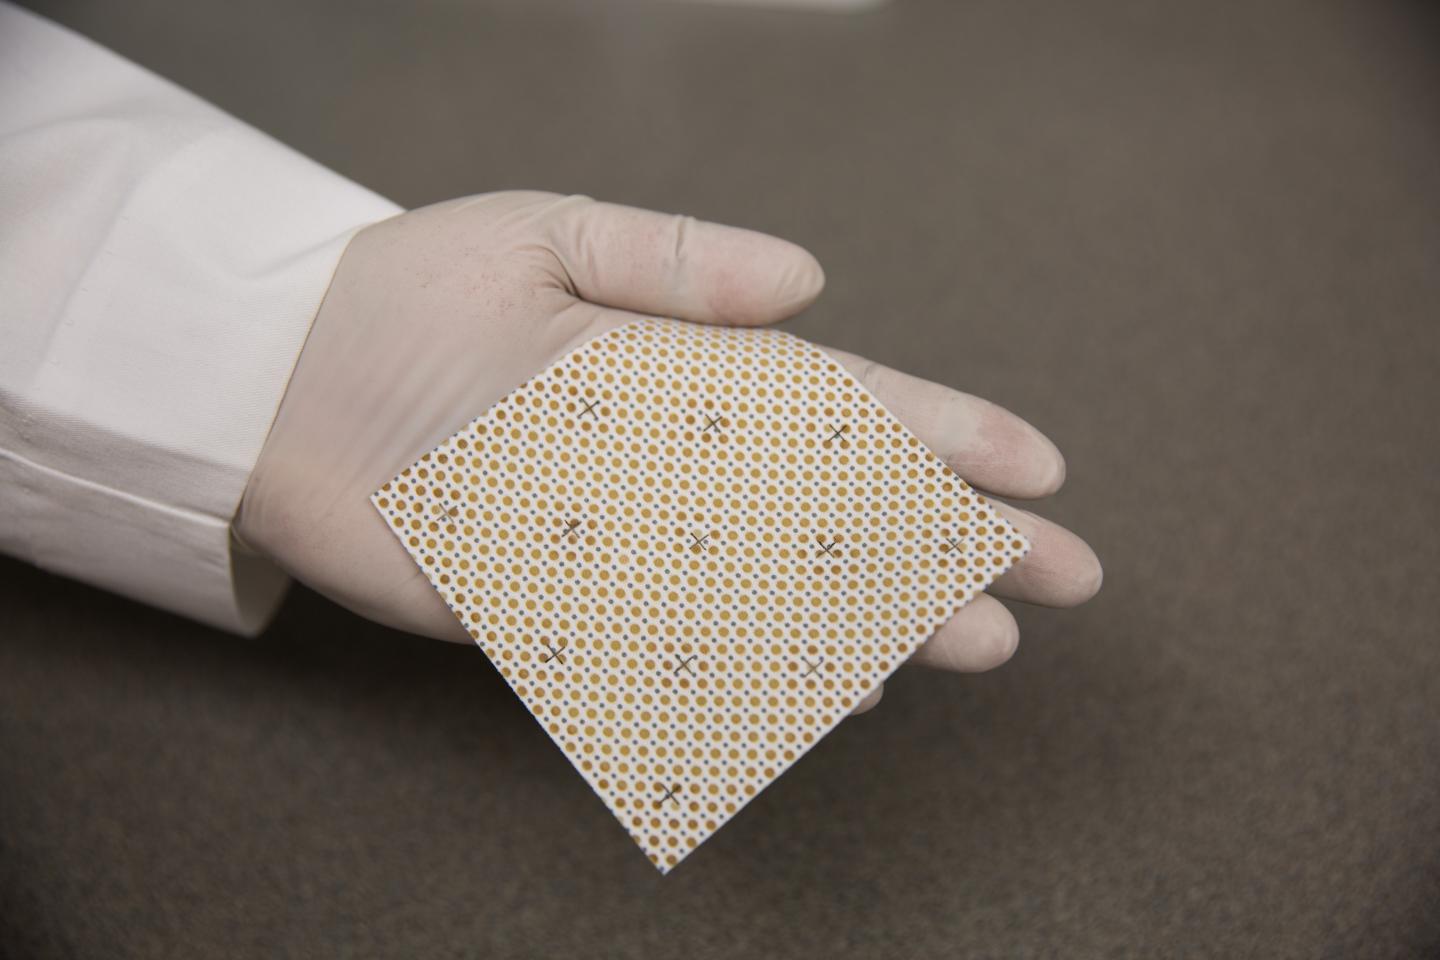 Study Shows Electric Bandages Can Fight Biofilm Infection, Antimicrobial Resistance